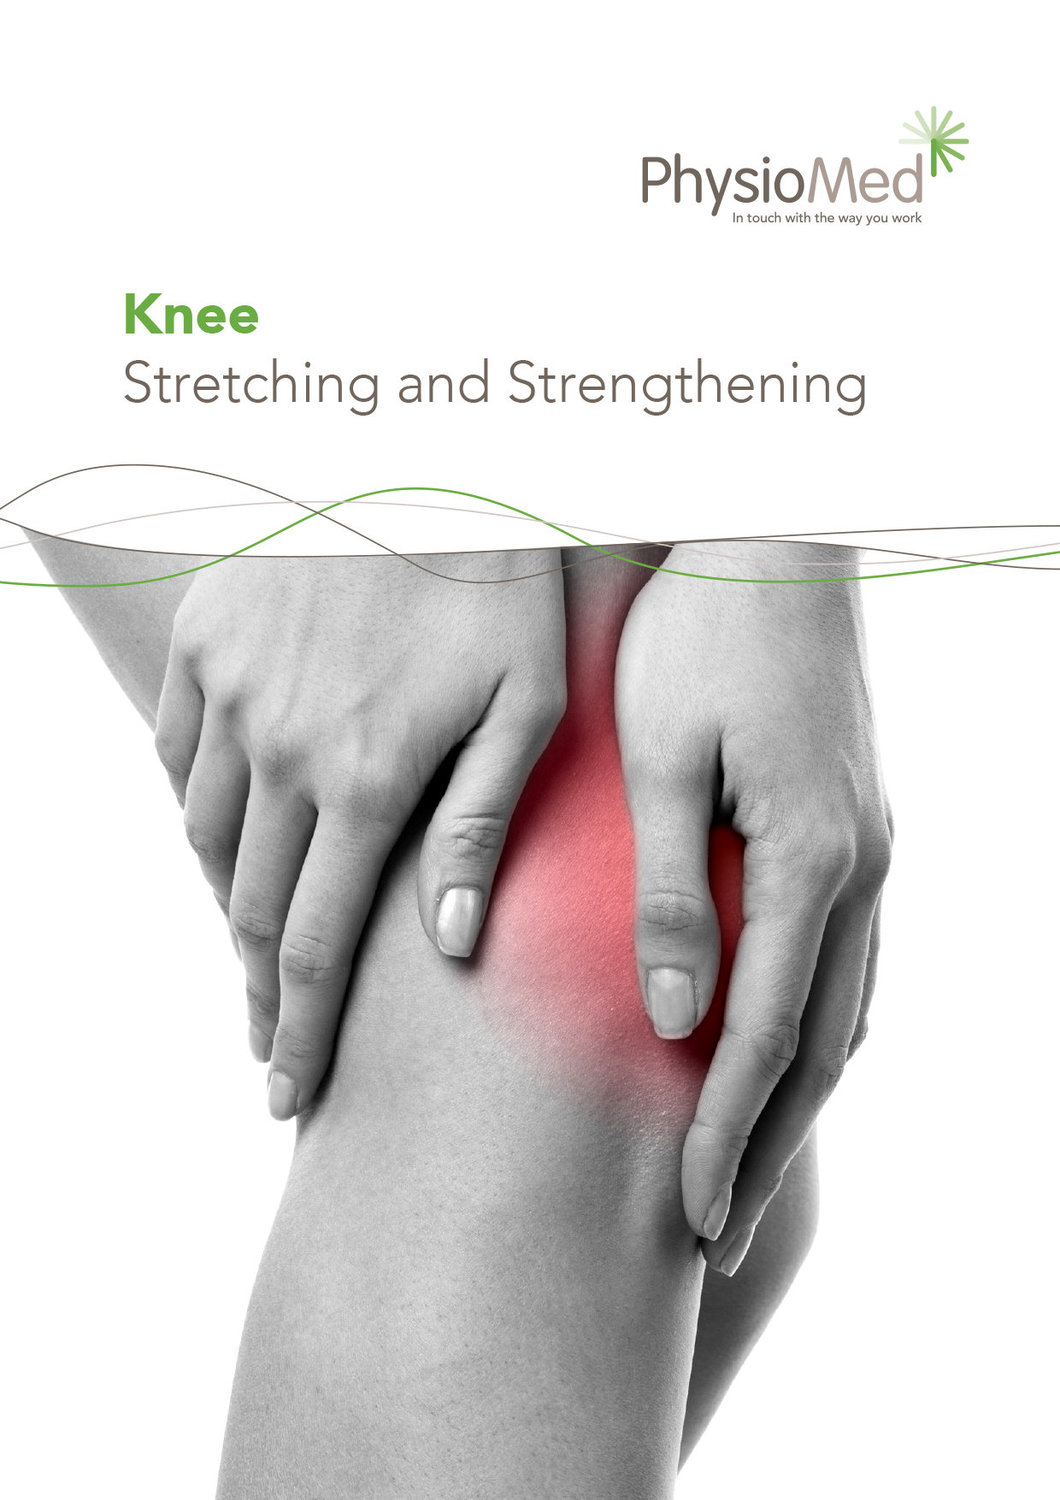 Free Guide Stretching And Strengthening The Knee - Physio Med ...